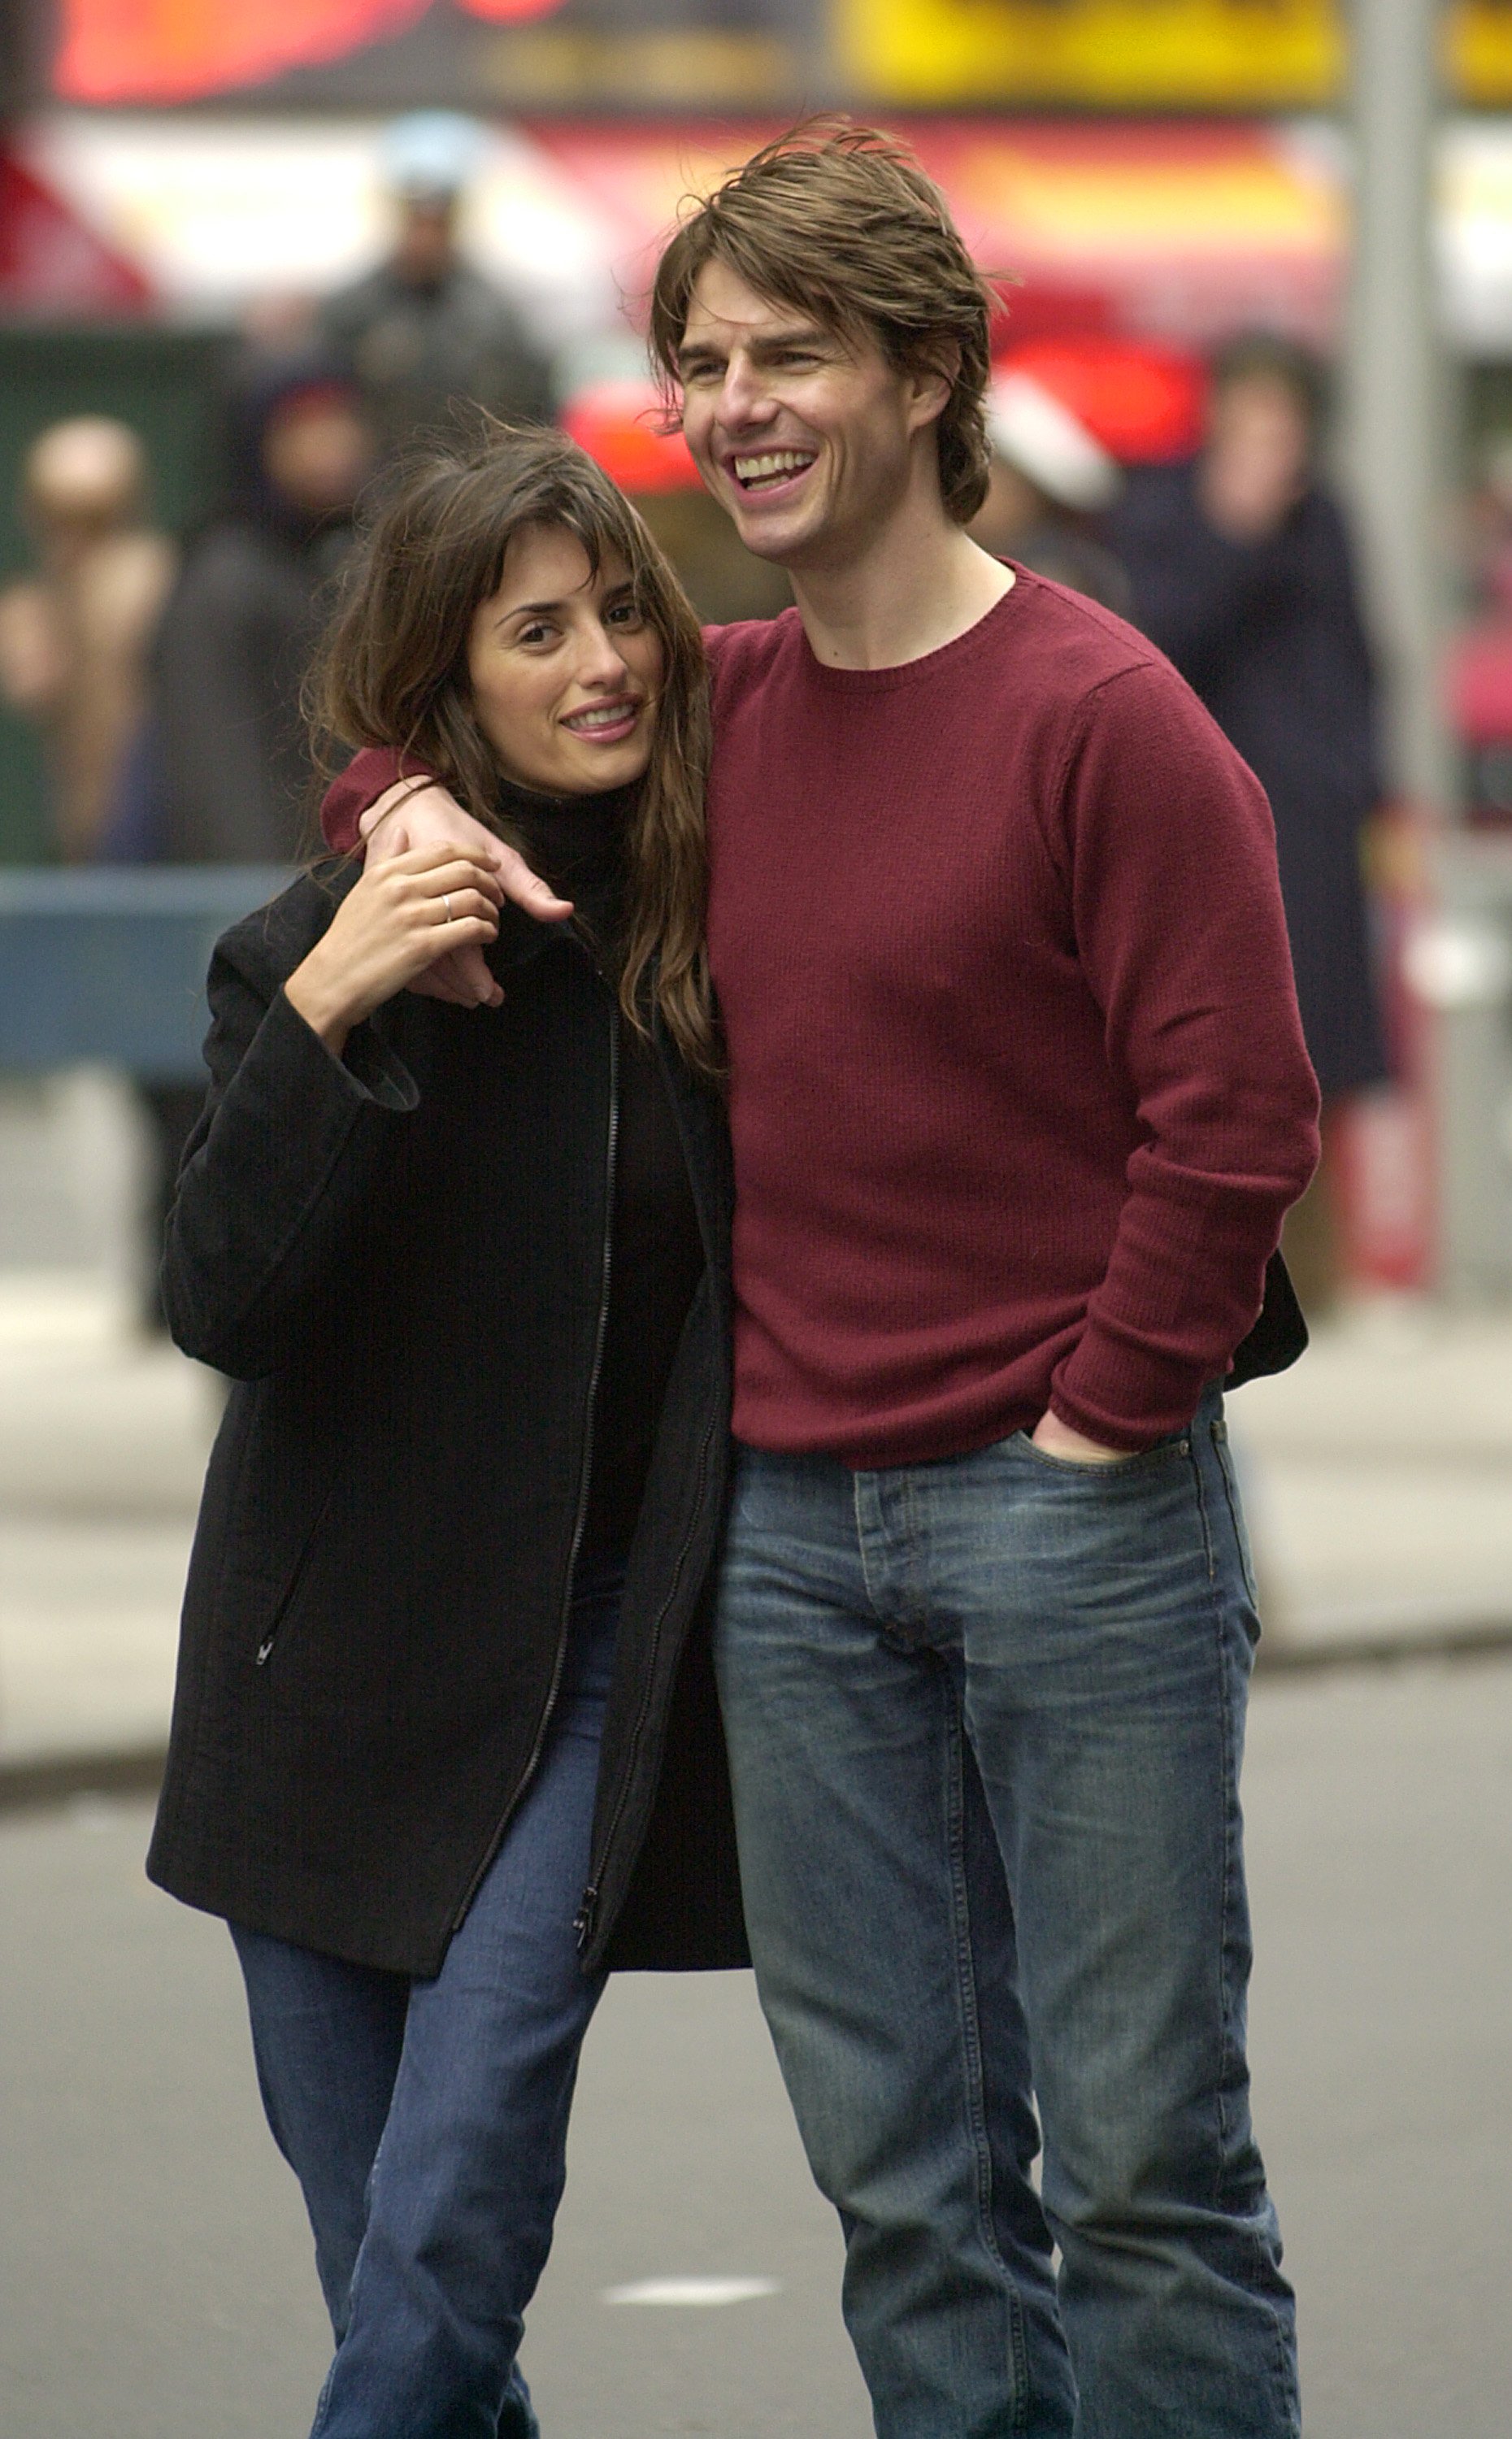 Tom Cruise and Penelope Cruz on the set of "Vanilla Sky" in Times Square, with Cameron Crowe directing at Times Square in New York City, New York, United States. | Source: Getty Images